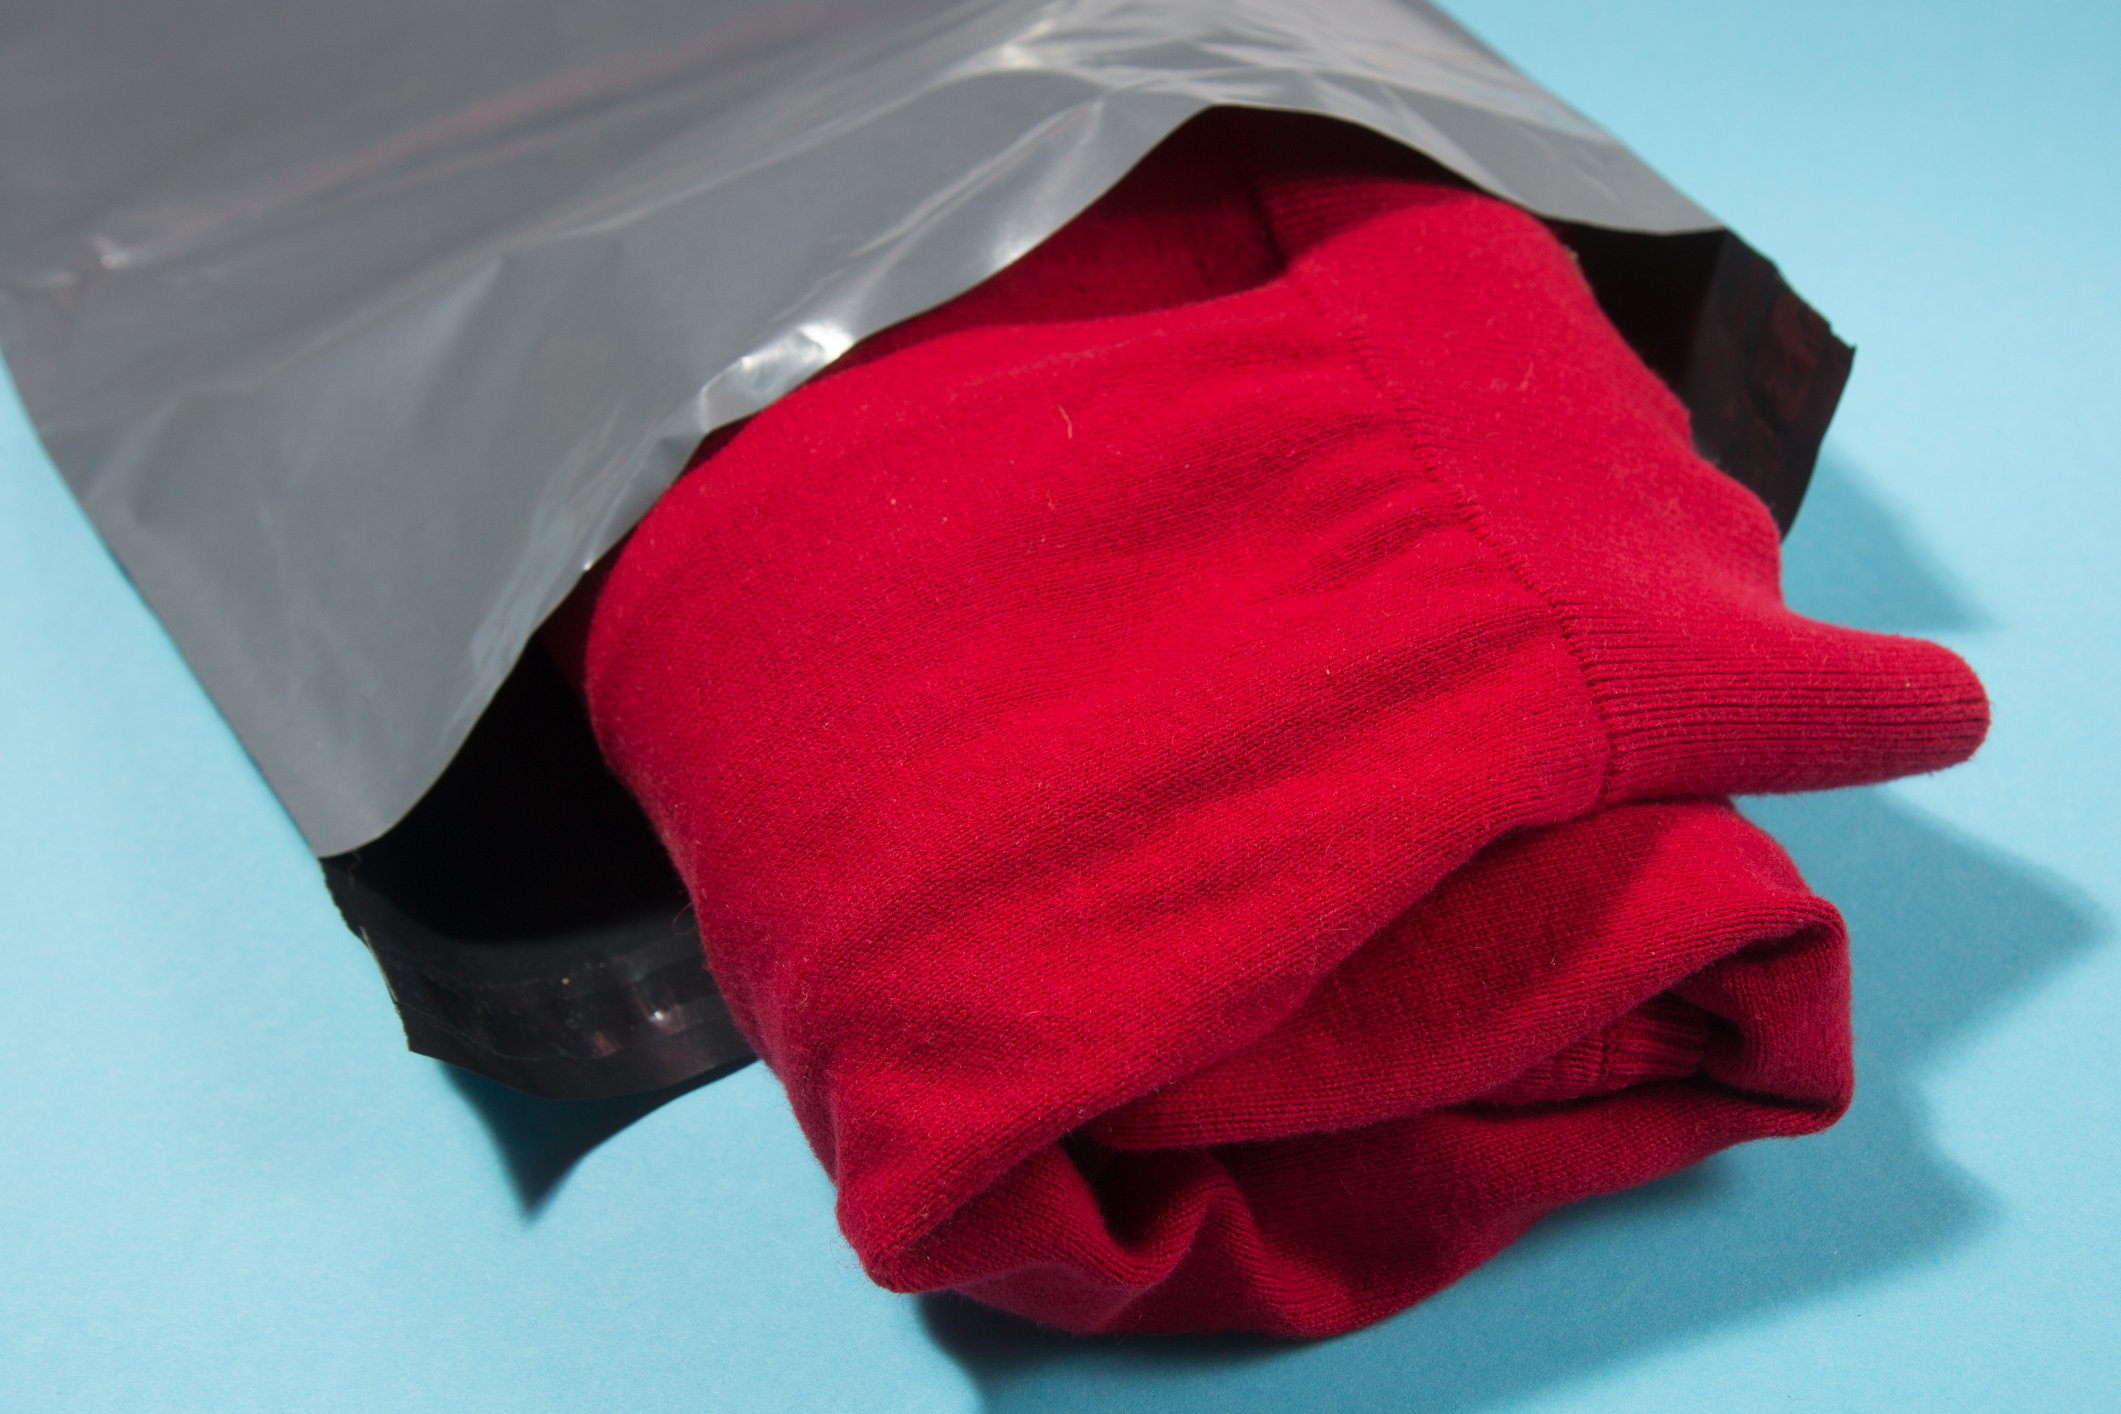 Red jumper in a silver poly mailer bag